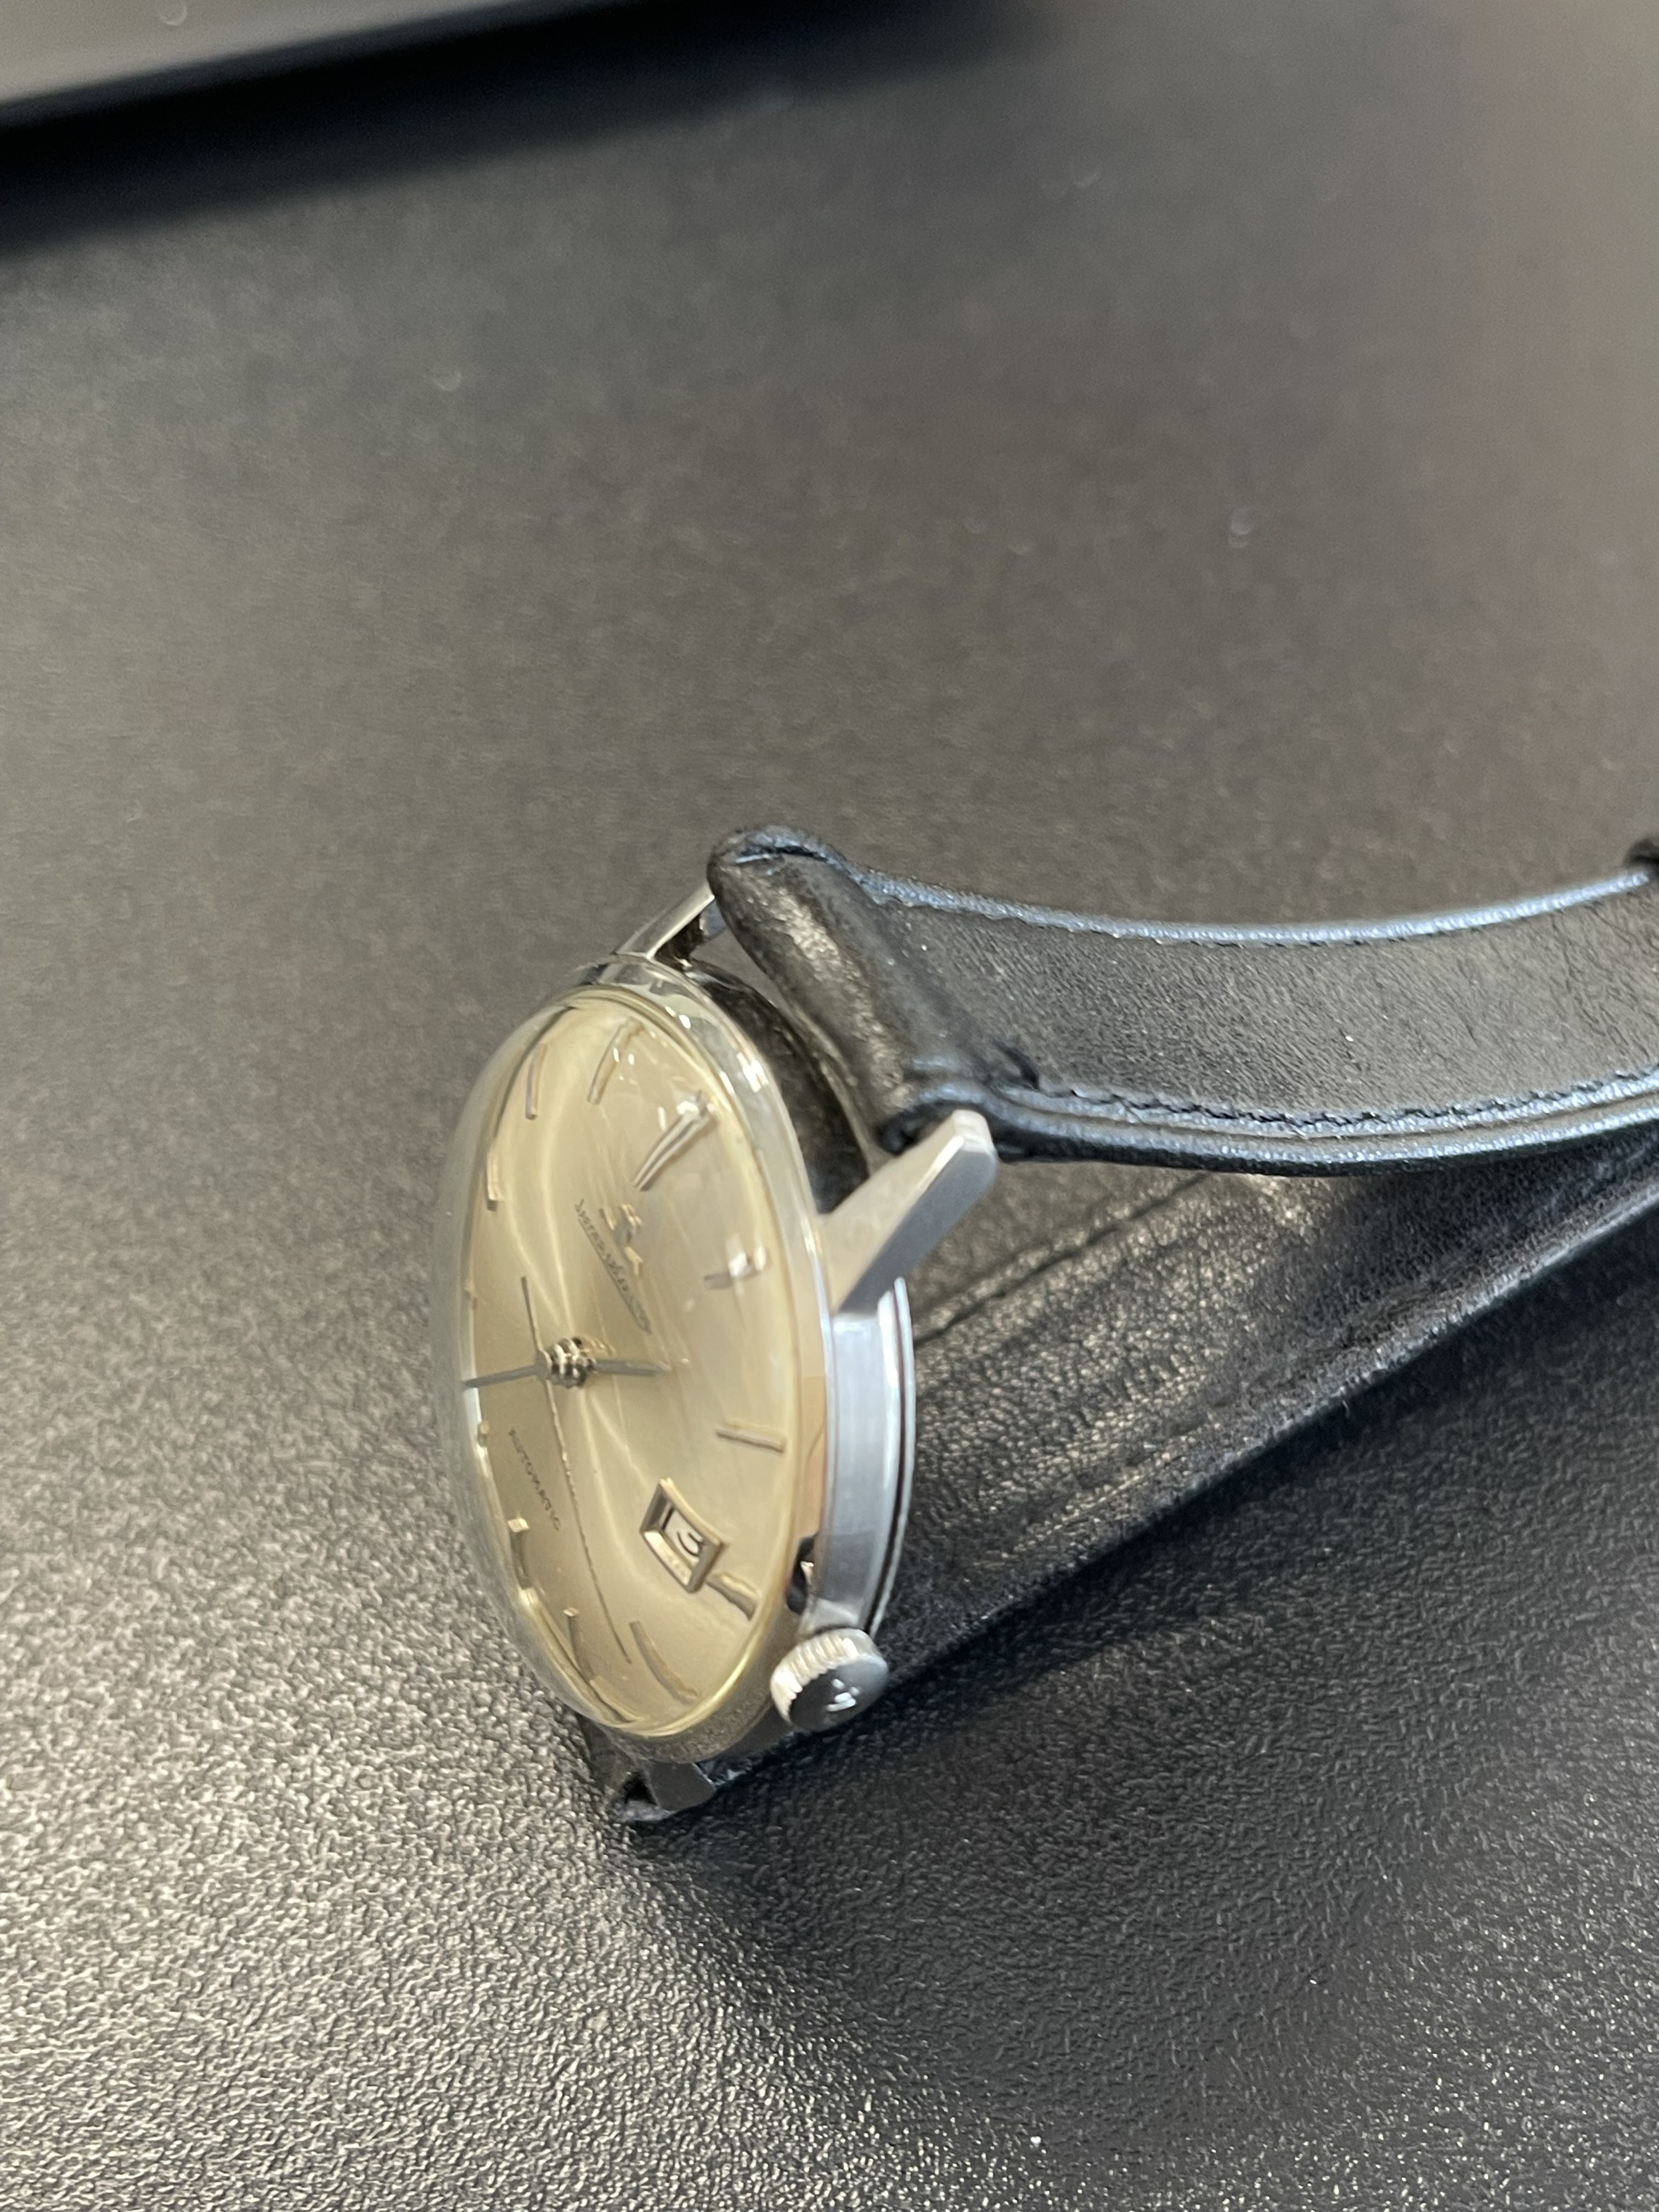 Vintage watch experience 古董手錶: Jaeger Lecoultre automatic date